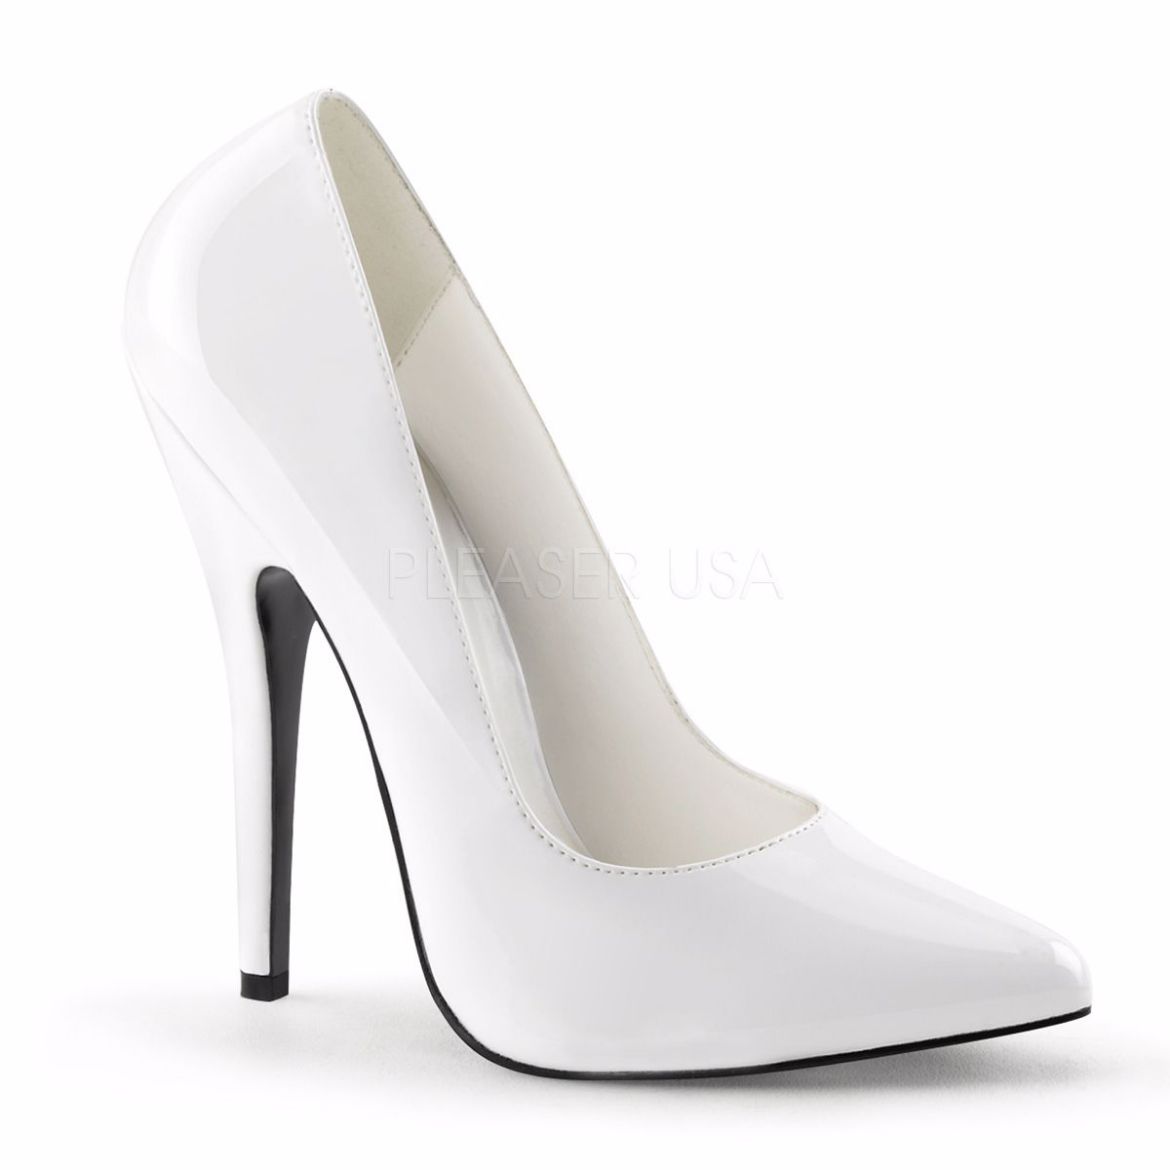 Product image of Devious Domina-420 White Patent, 6 inch (15.2 cm) Heel Court Pump Shoes